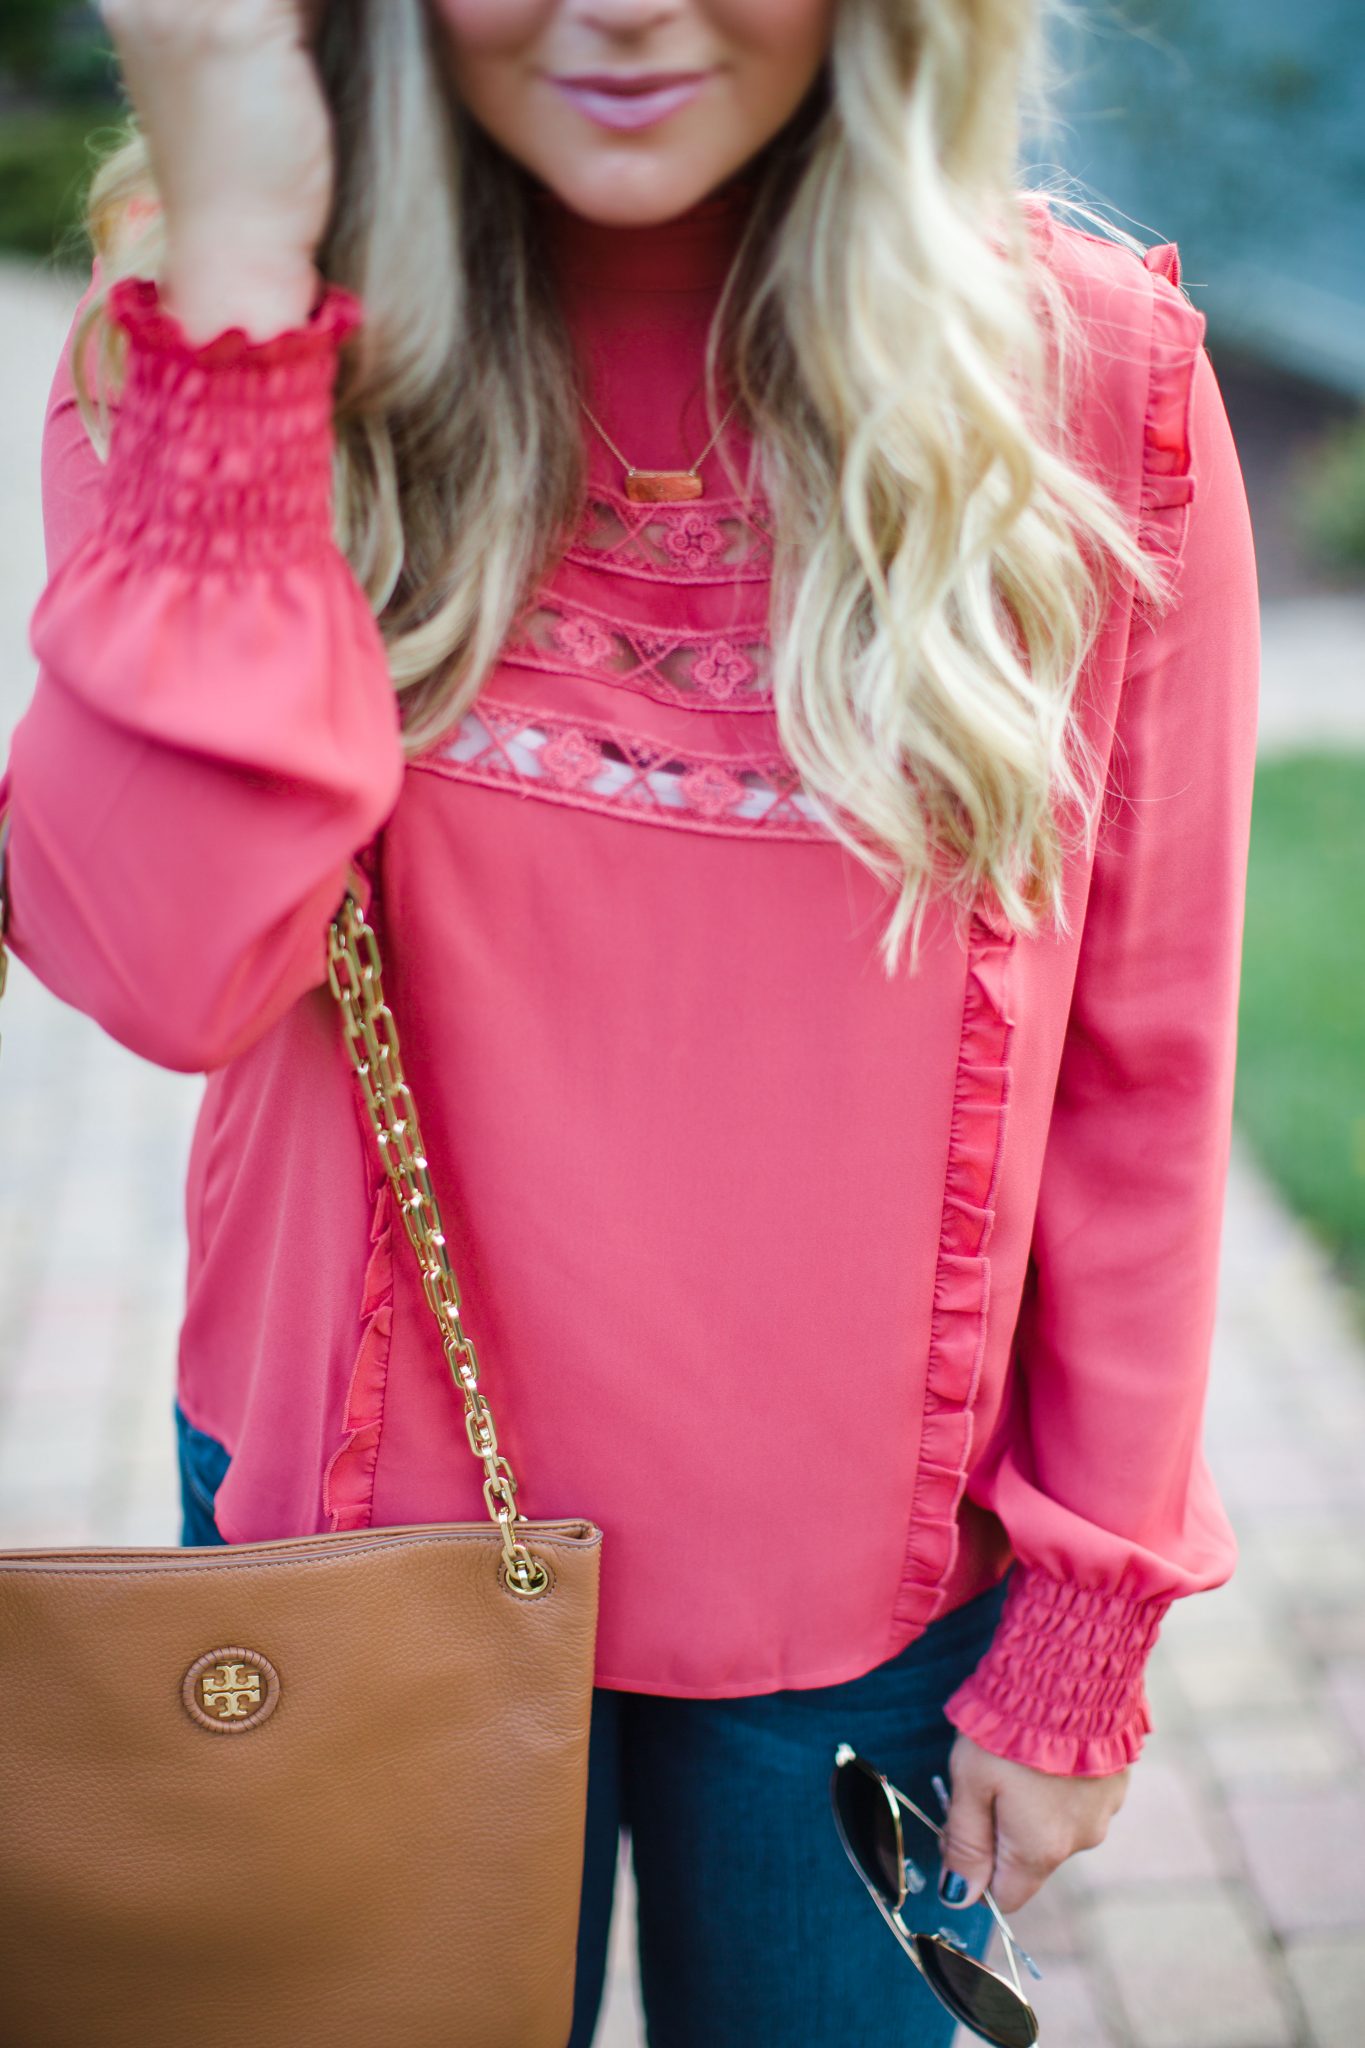 Coral top & tan accessories, fall outfit